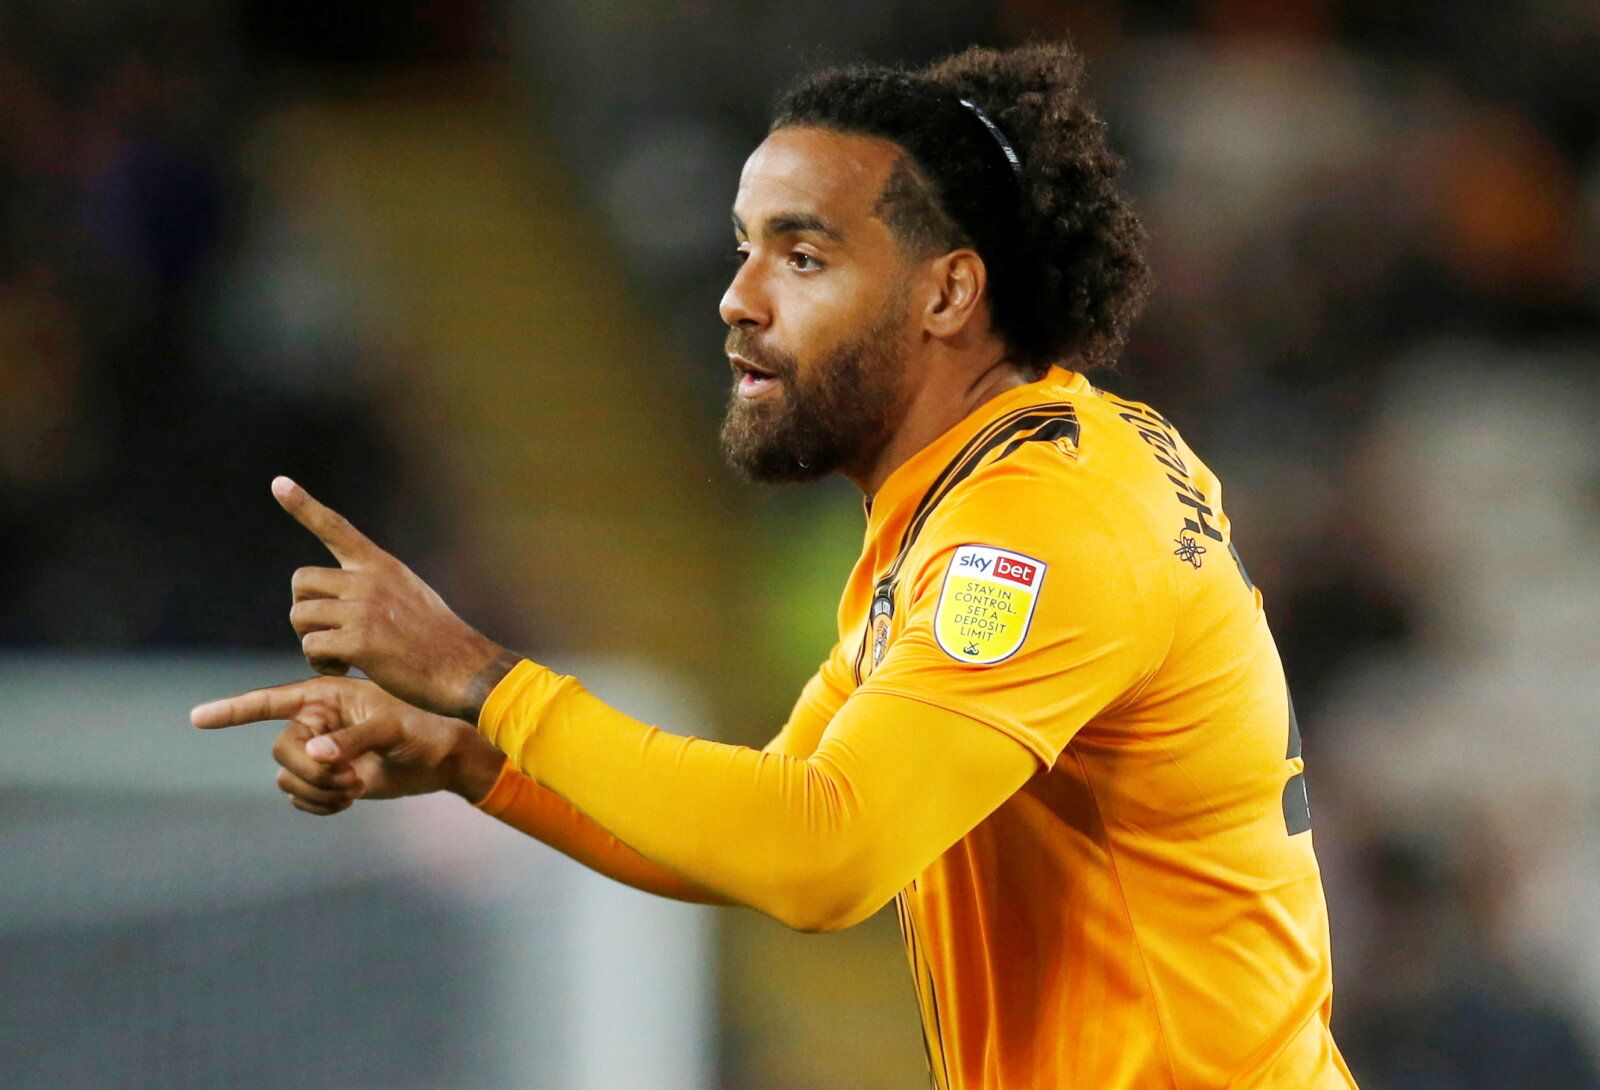 Soccer Football - Championship - Hull City v Derby County - KCOM Stadium, Hull, Britain - August 18, 2021  Hull City's Tom Huddlestone    Action Images/Ed Sykes  EDITORIAL USE ONLY. No use with unauthorized audio, video, data, fixture lists, club/league logos or 